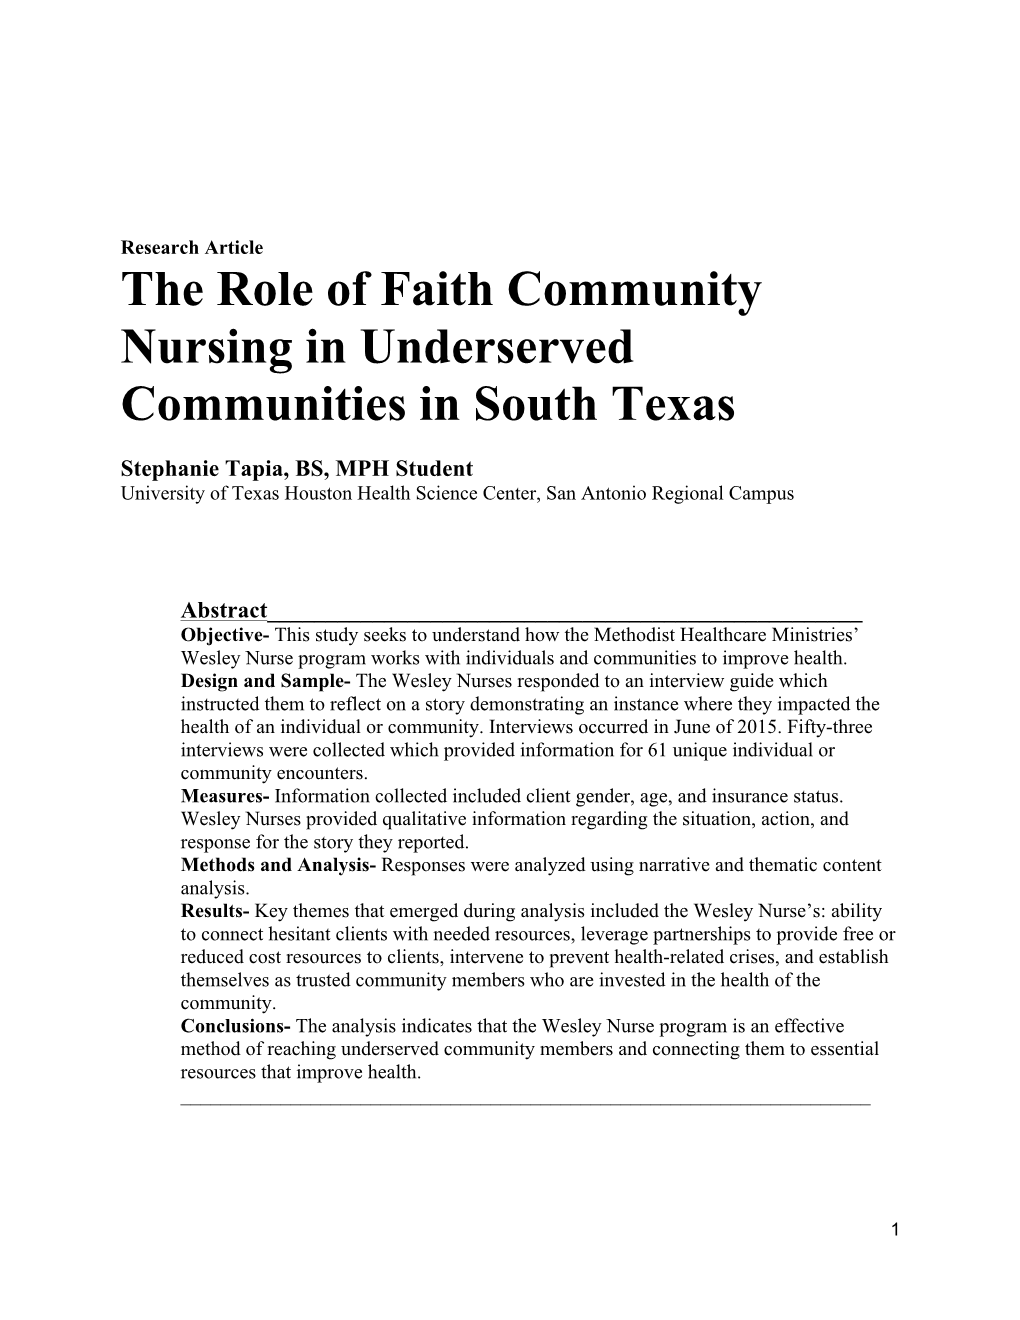 The Role of Faith Community Nursing in Underserved Communities in South Texas